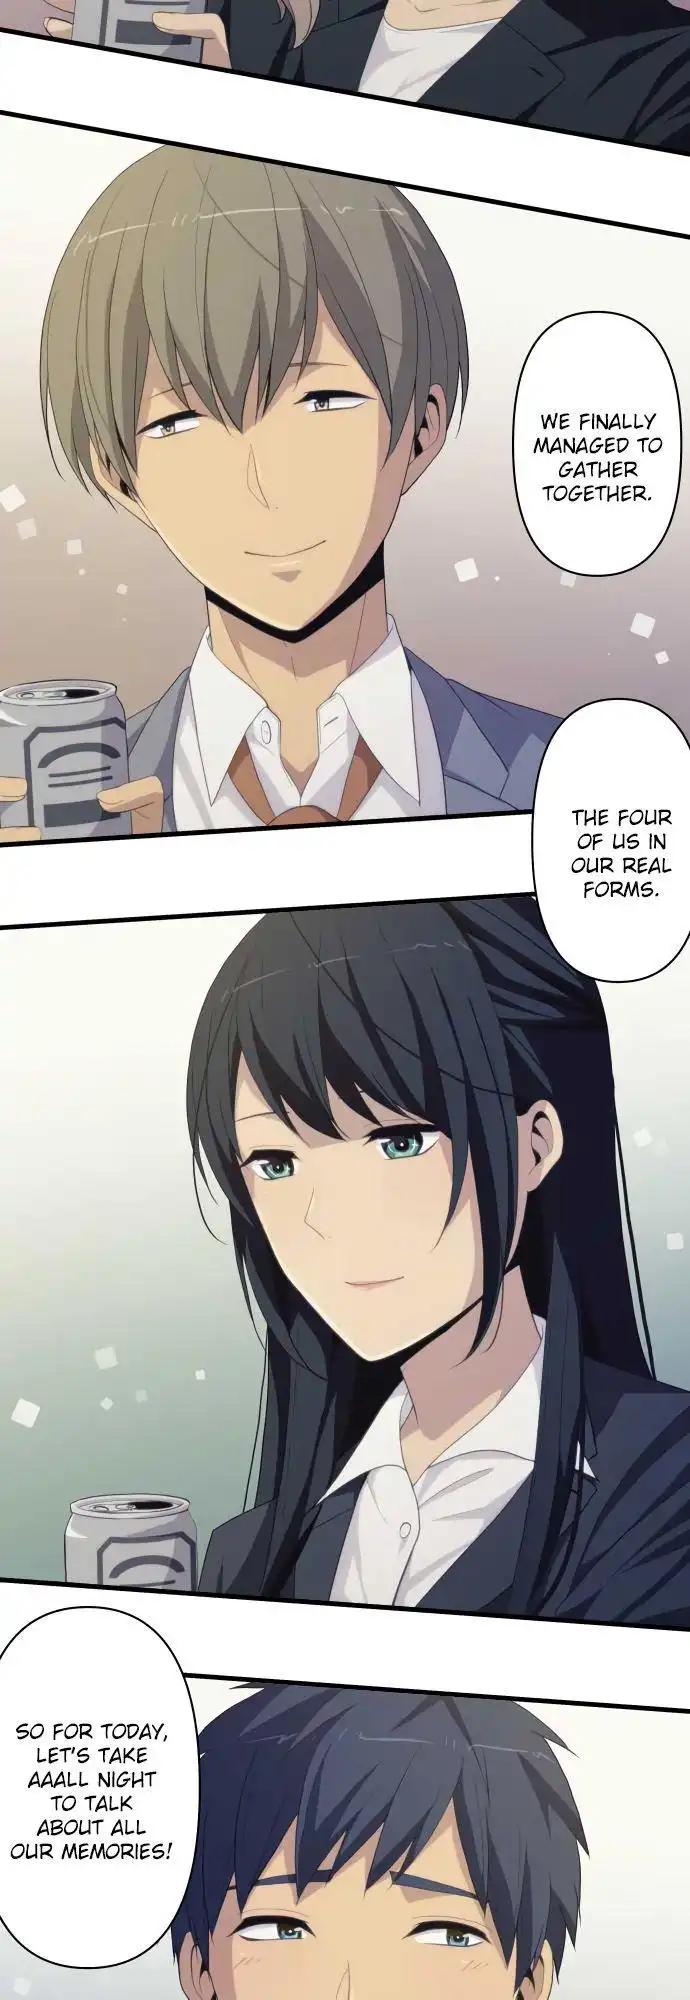 ReLIFE Chapter 222